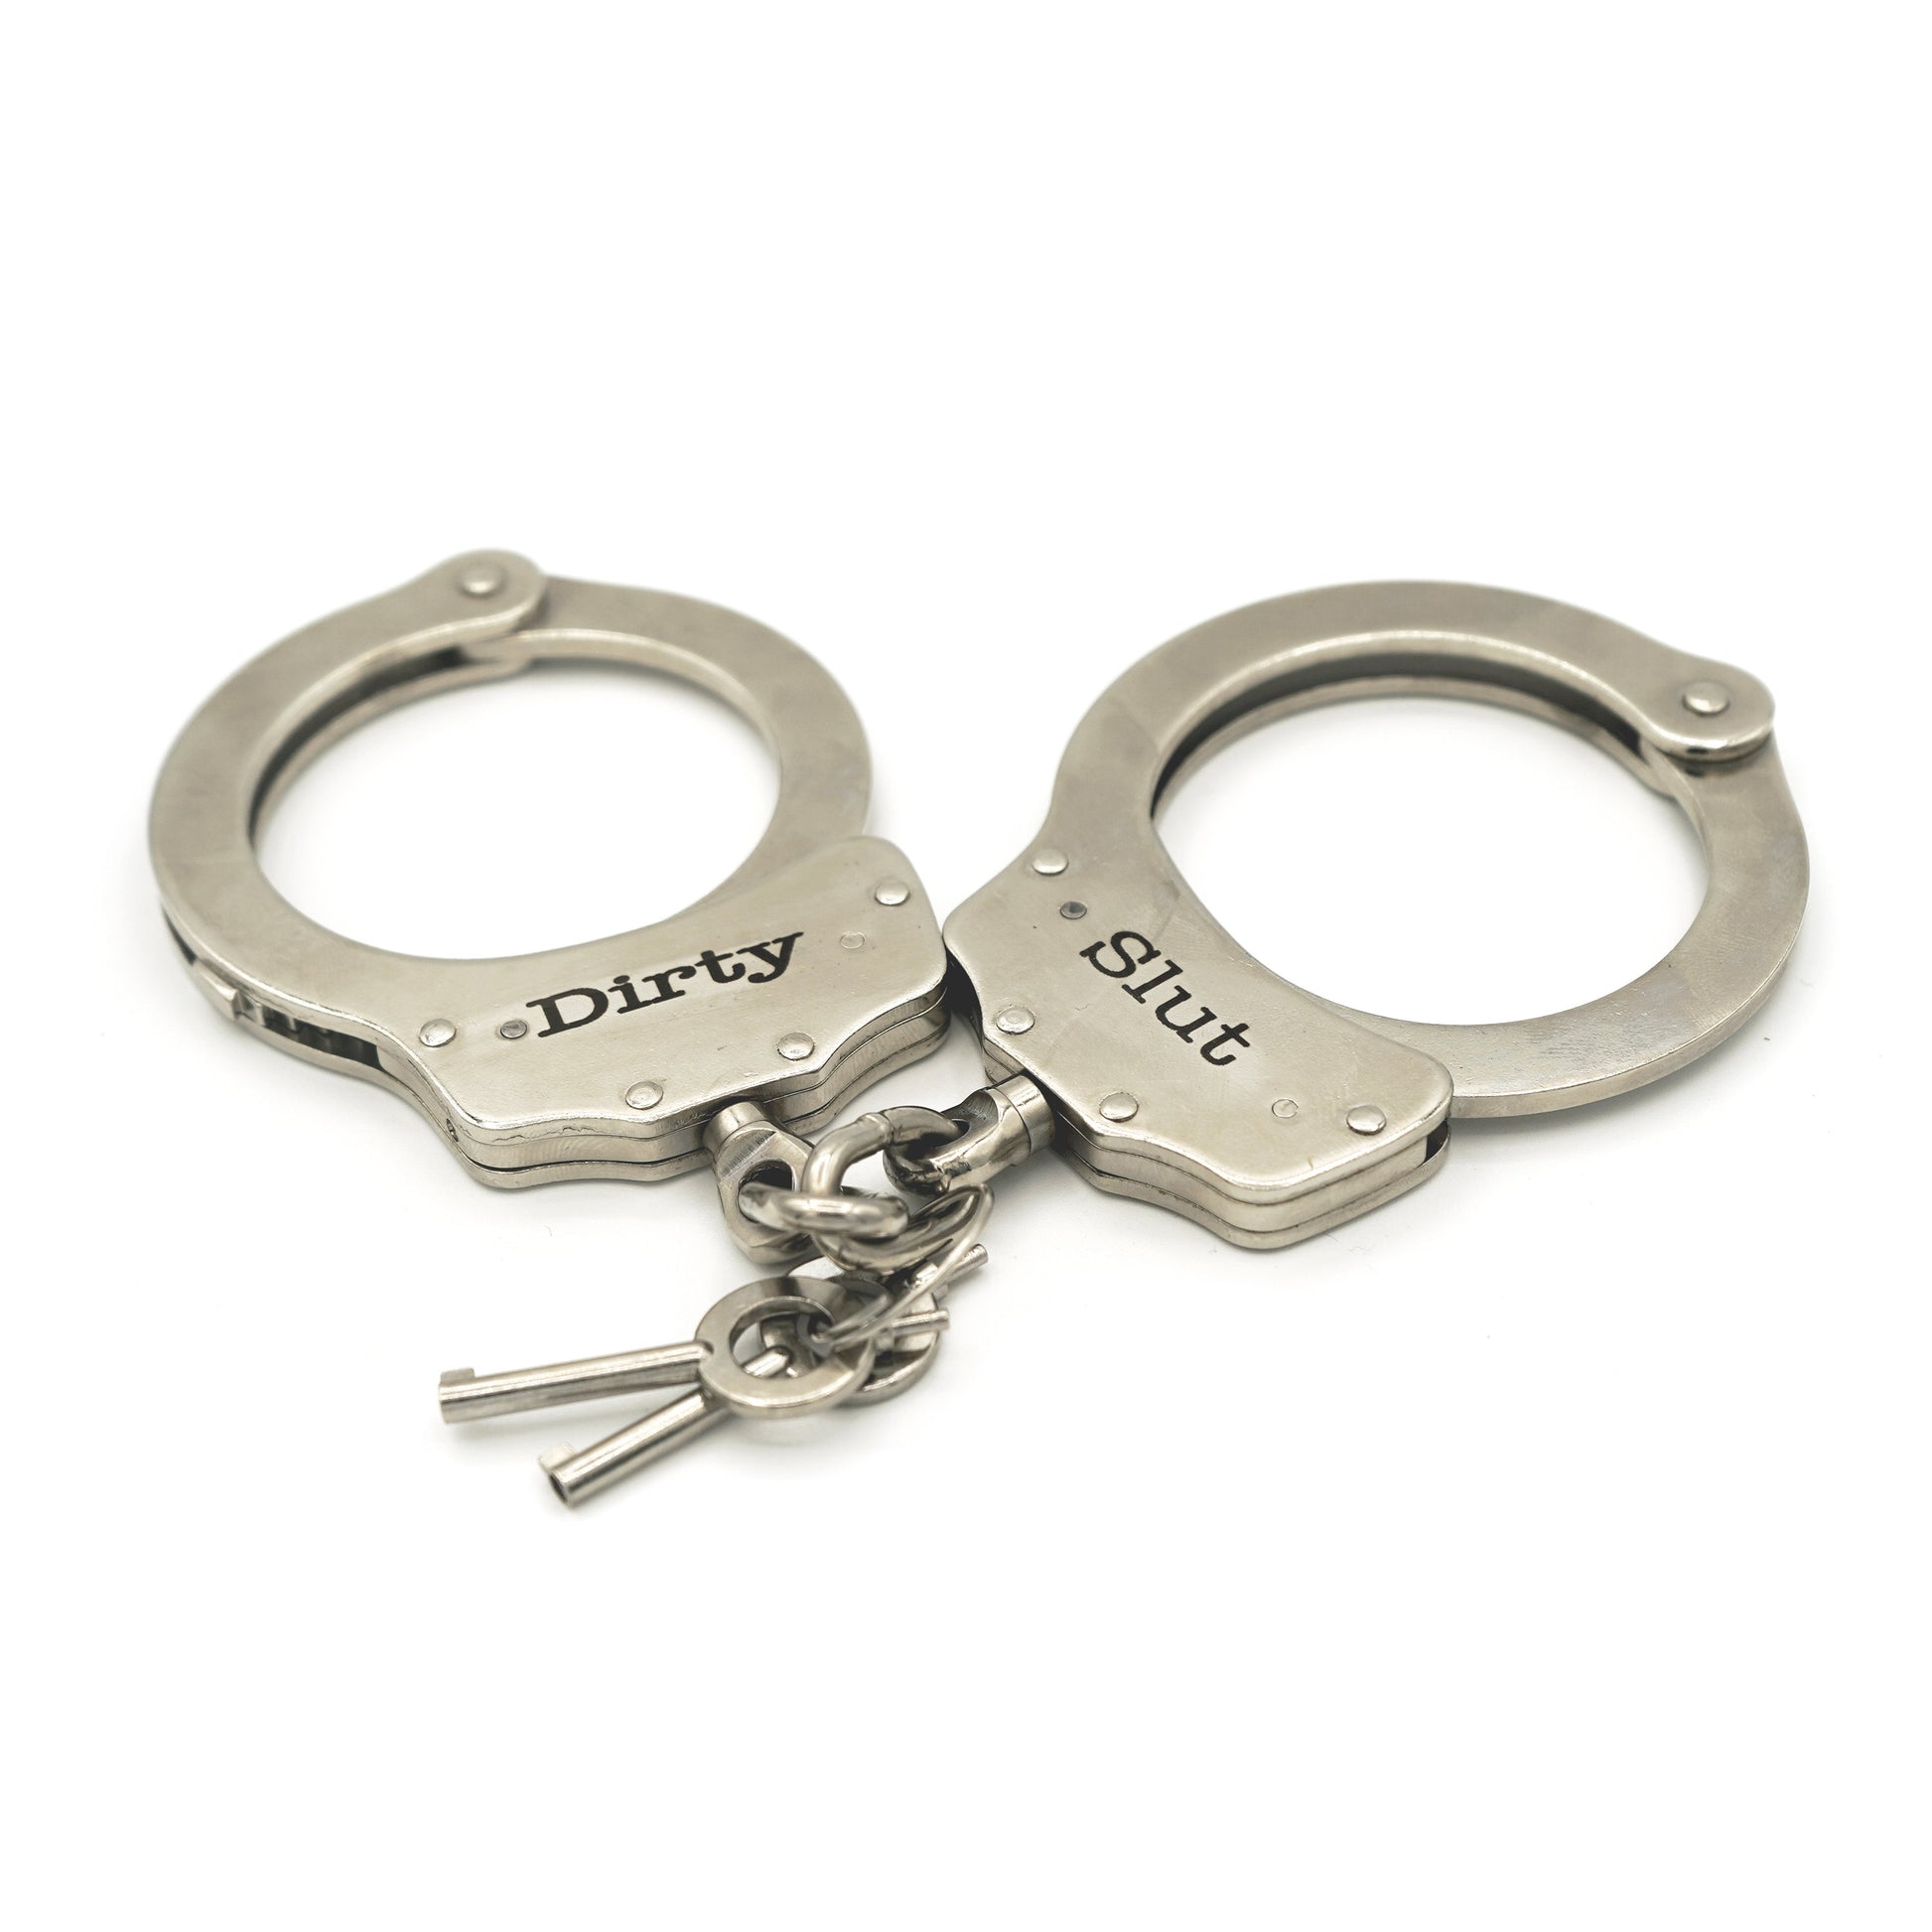 Dirty Slut engraved Police handcuffs with Chain